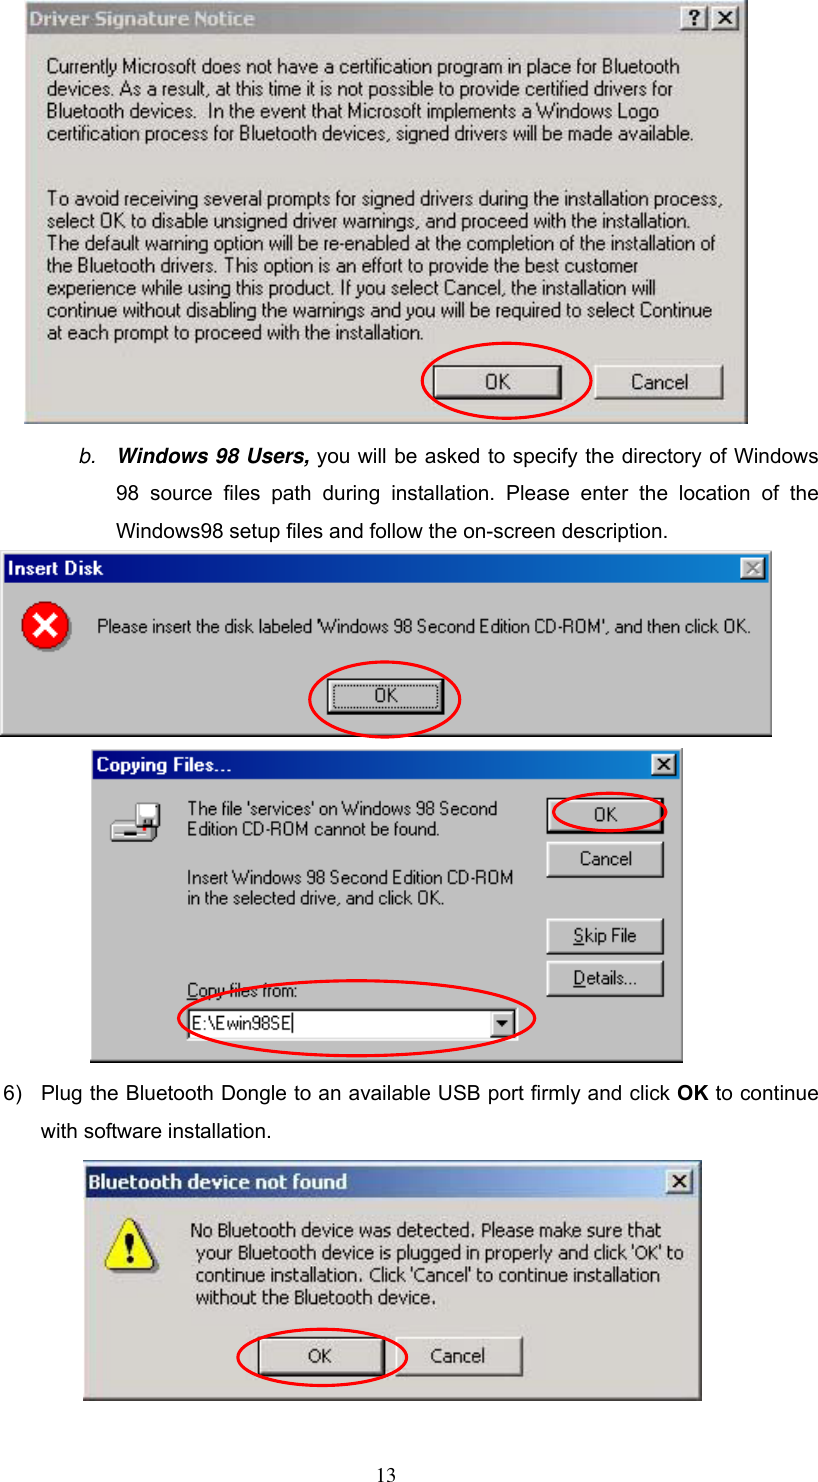  b.  Windows 98 Users, you will be asked to specify the directory of Windows 98 source files path during installation. Please enter the location of the Windows98 setup files and follow the on-screen description.   6)  Plug the Bluetooth Dongle to an available USB port firmly and click OK to continue with software installation.   13 